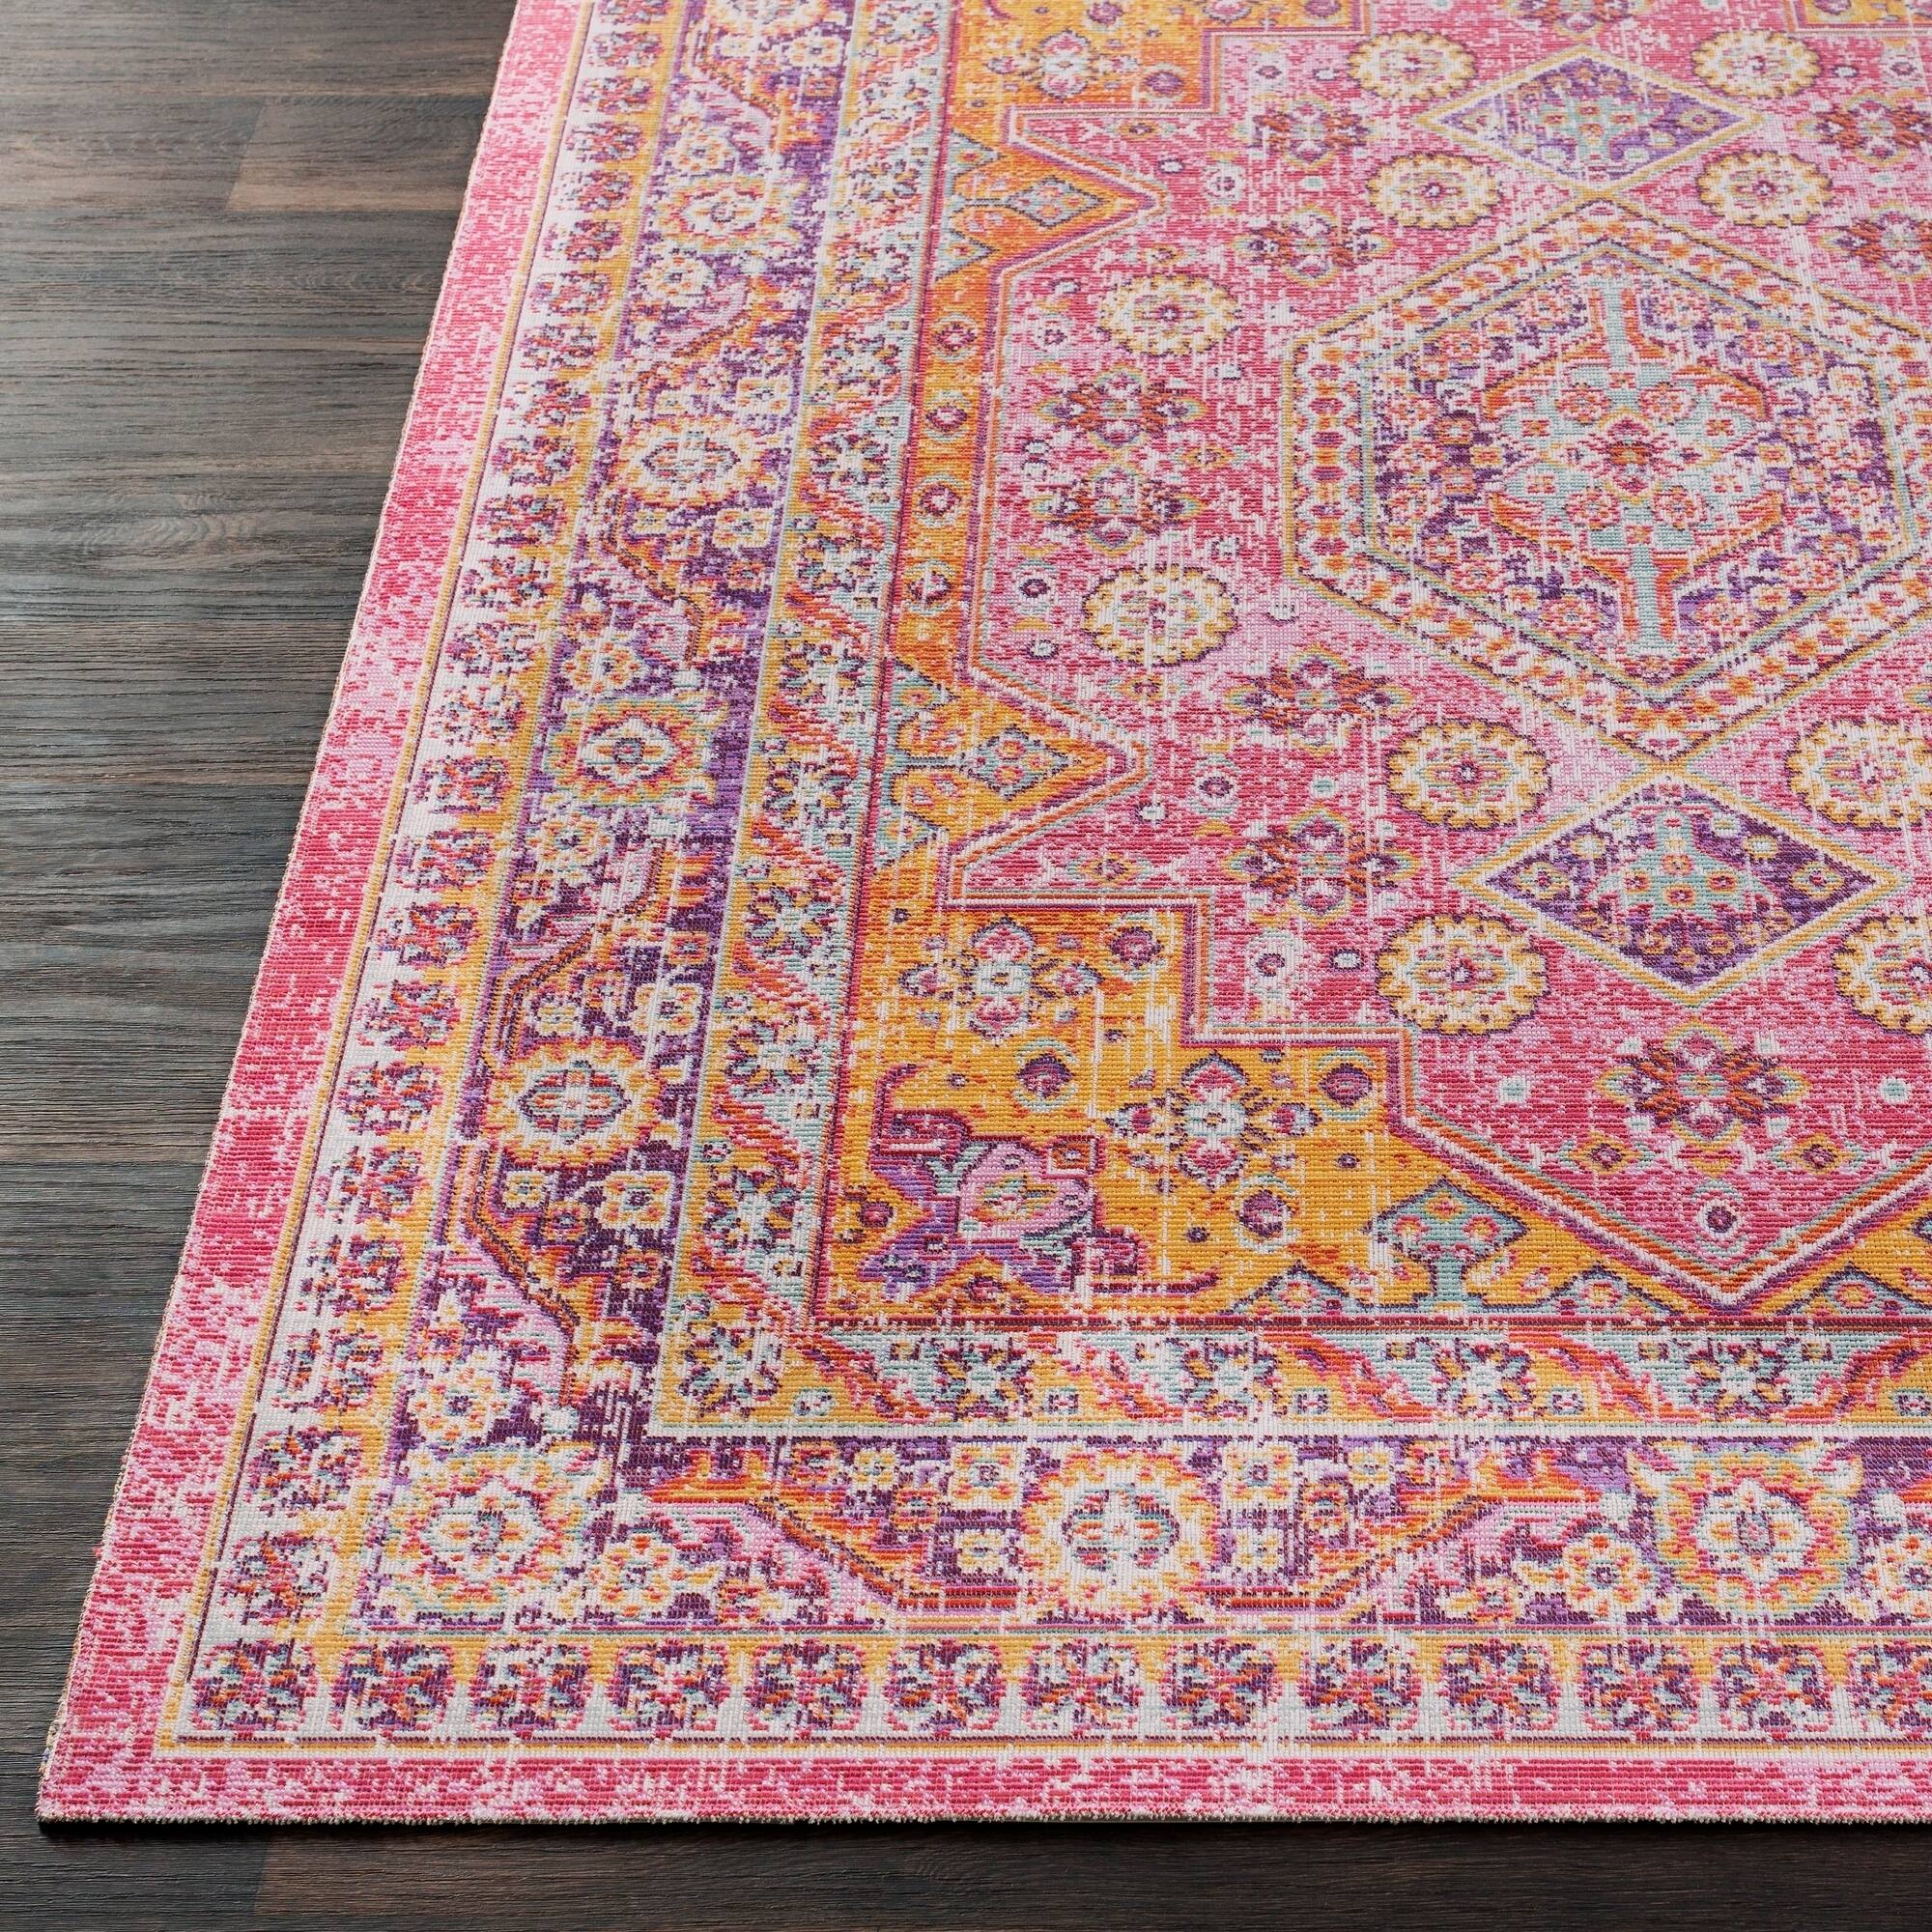 Buy Area Rugs Online at Overstock.com | Our Best Rugs Deals